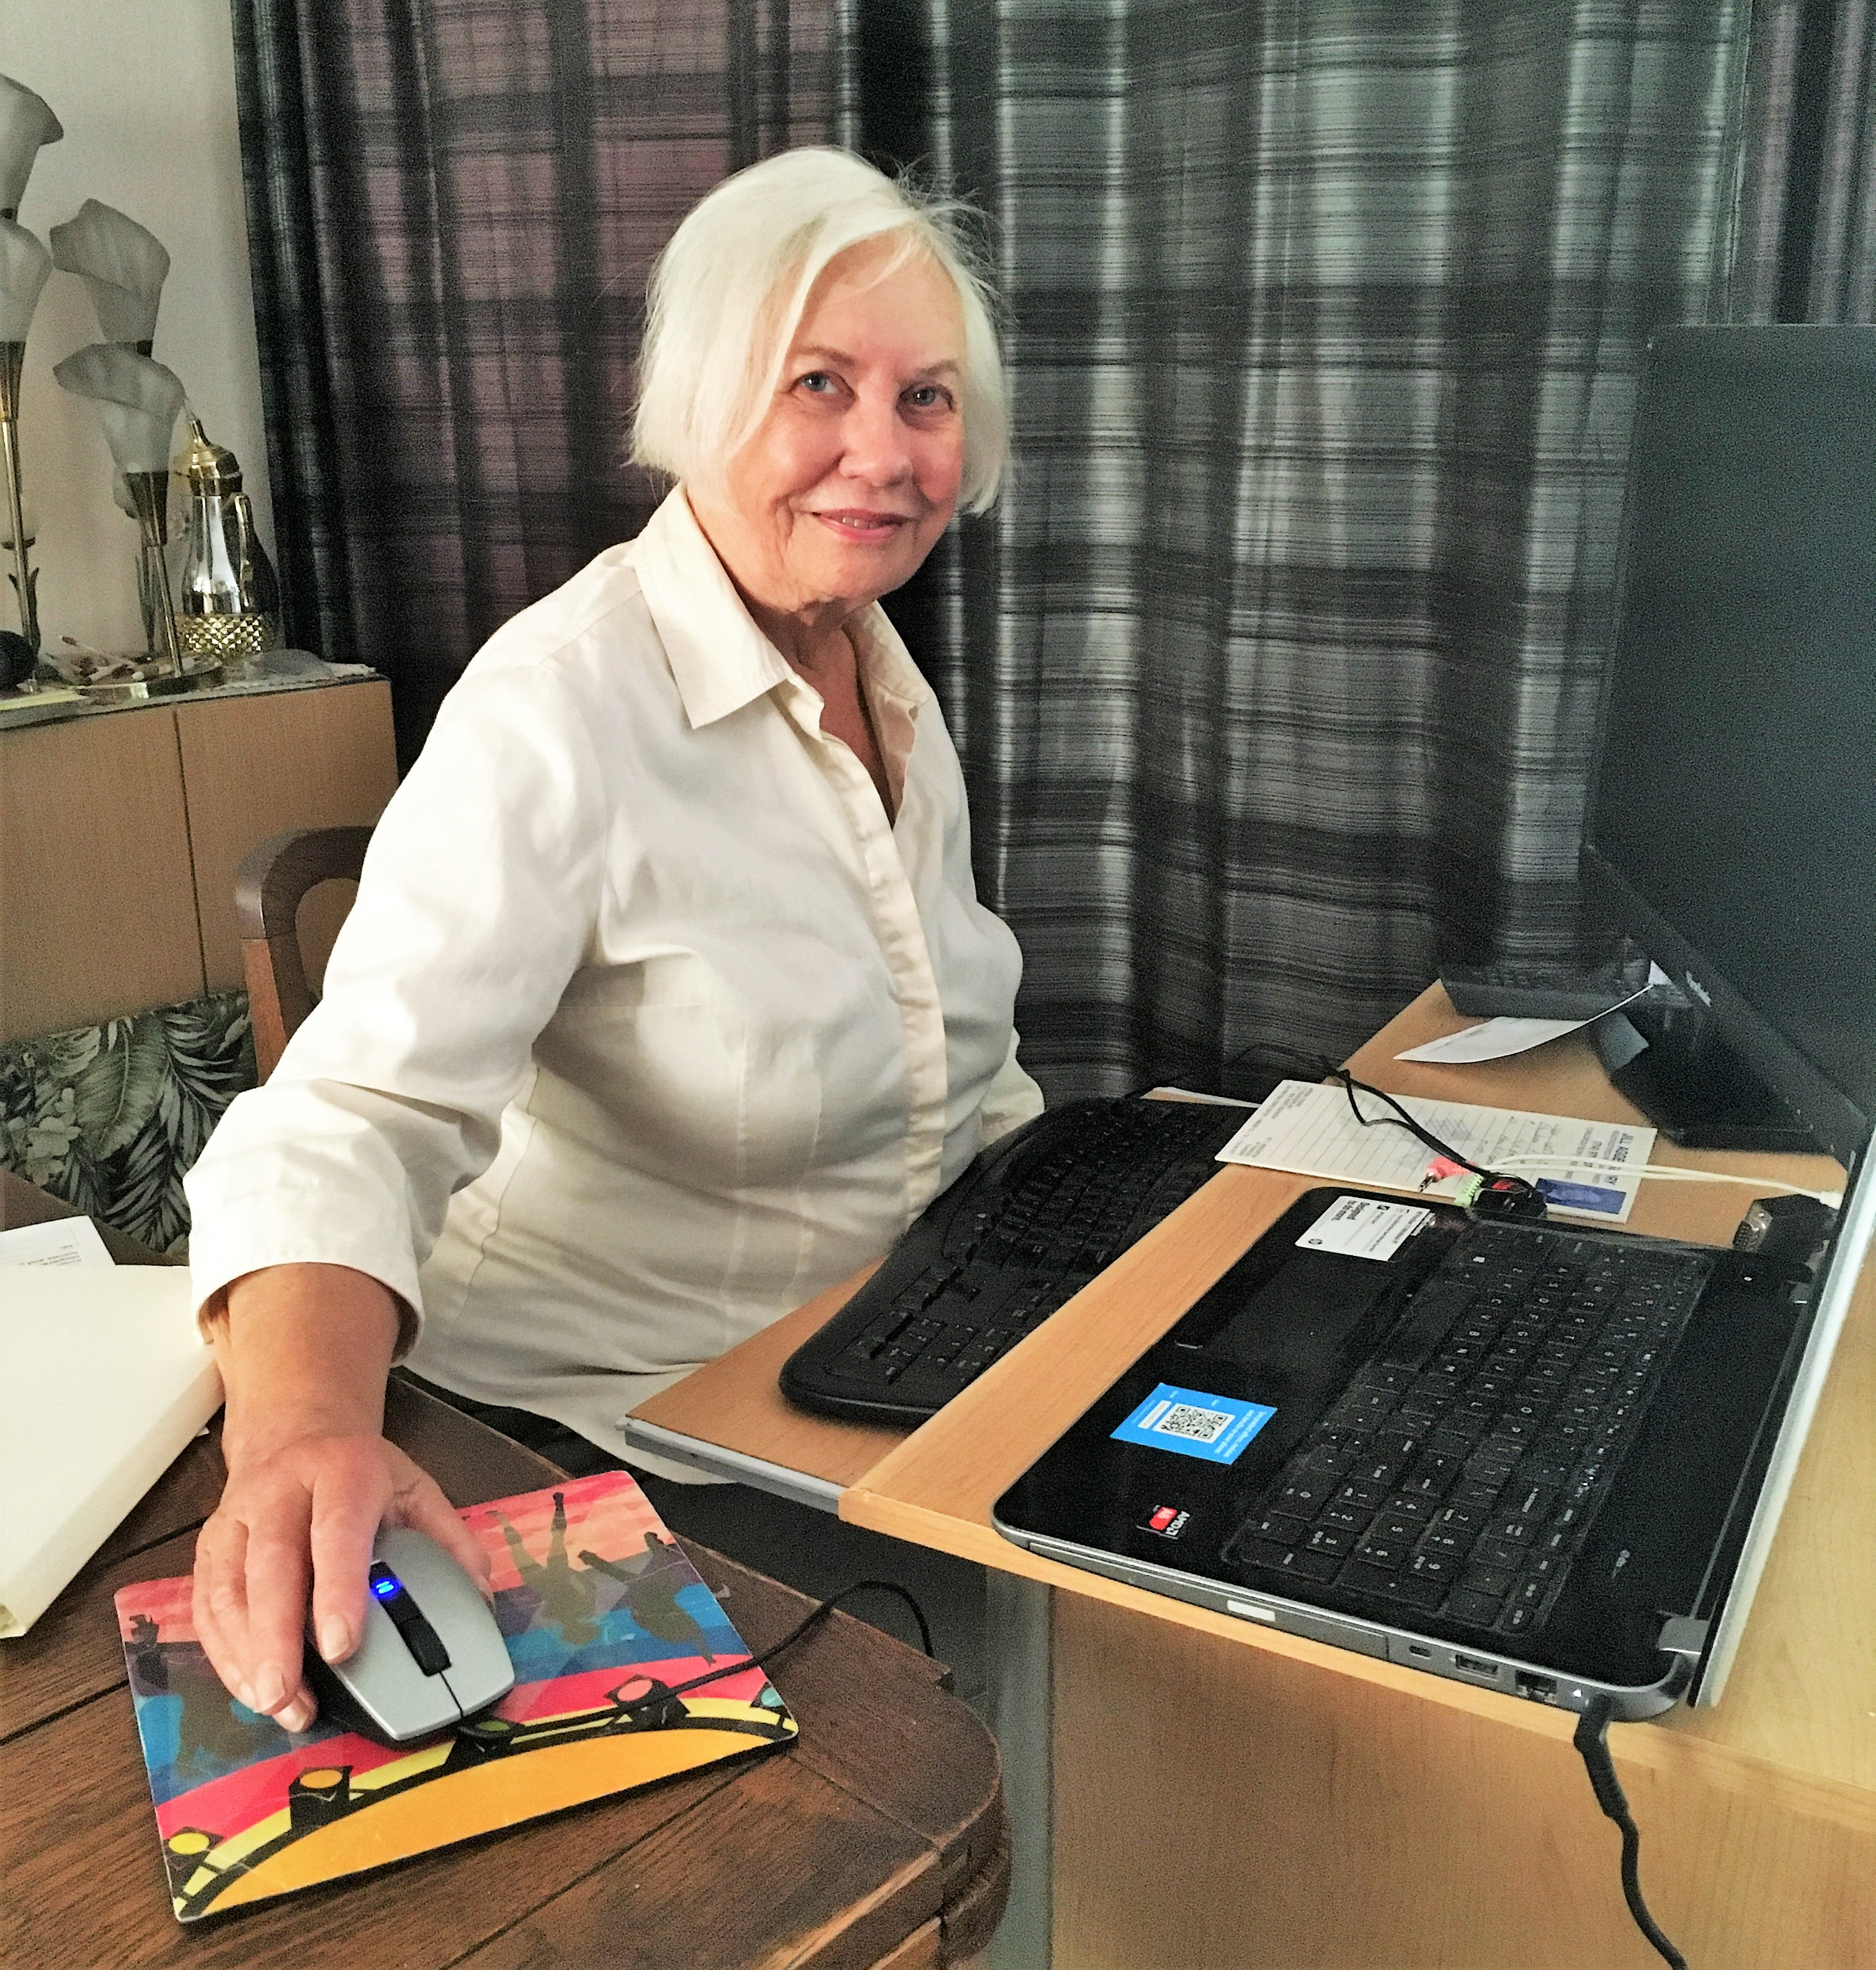 Jill Aggersbury of Novato, a retired nurse, works on COVID-19 contact tracing from her home.